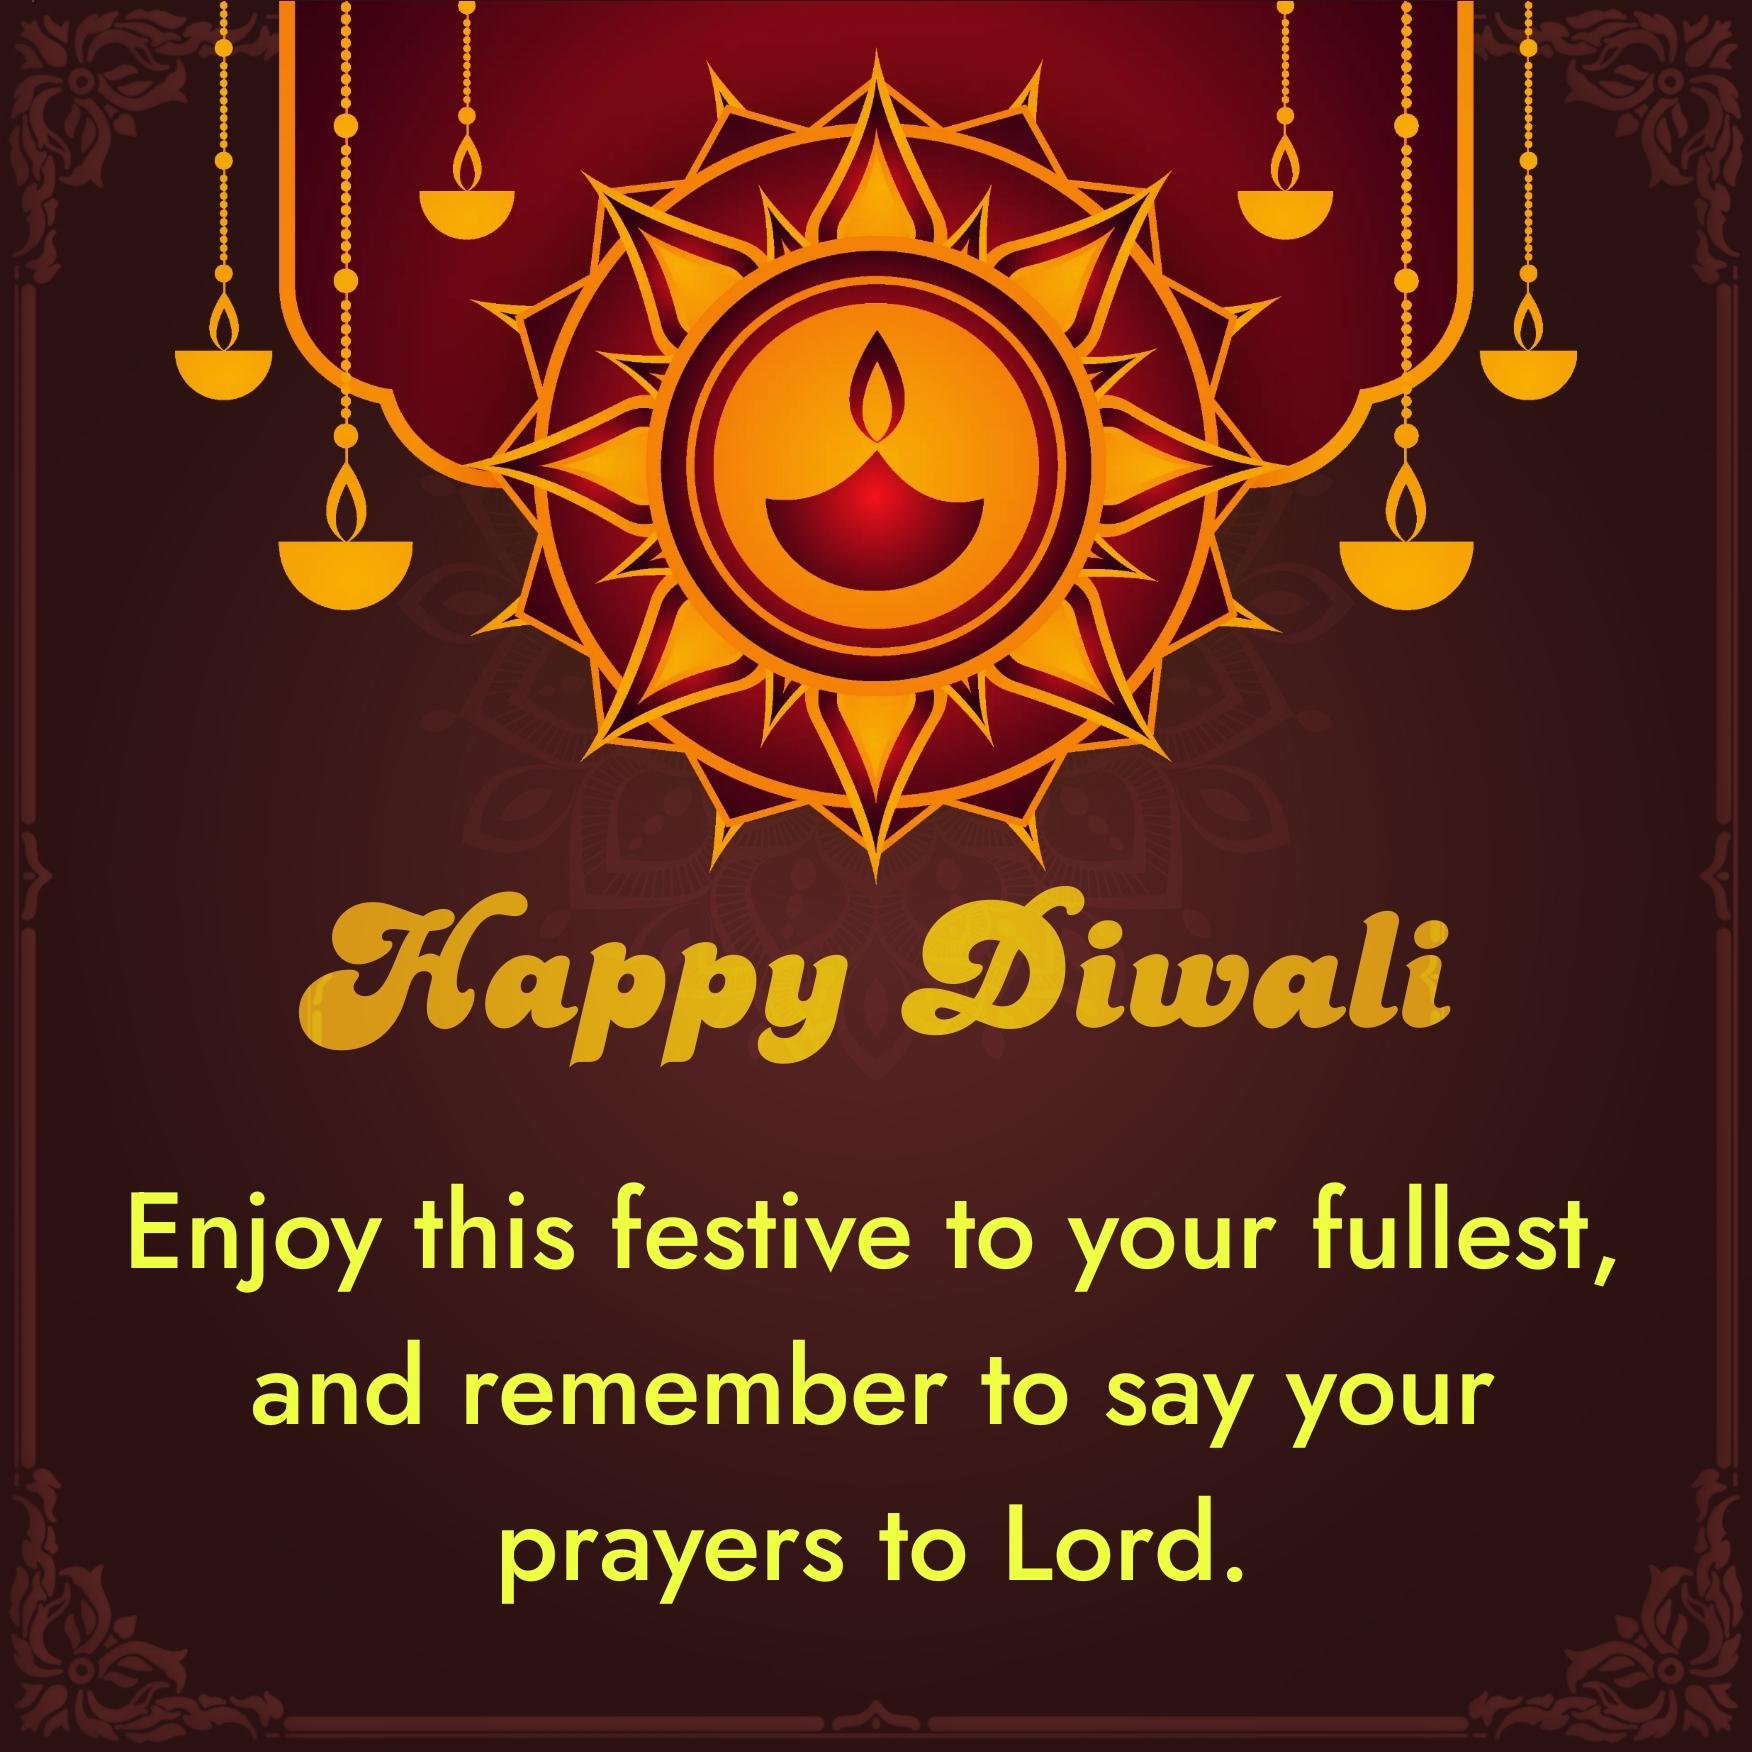 Enjoy this festive to your fullest and remember to say your prayers